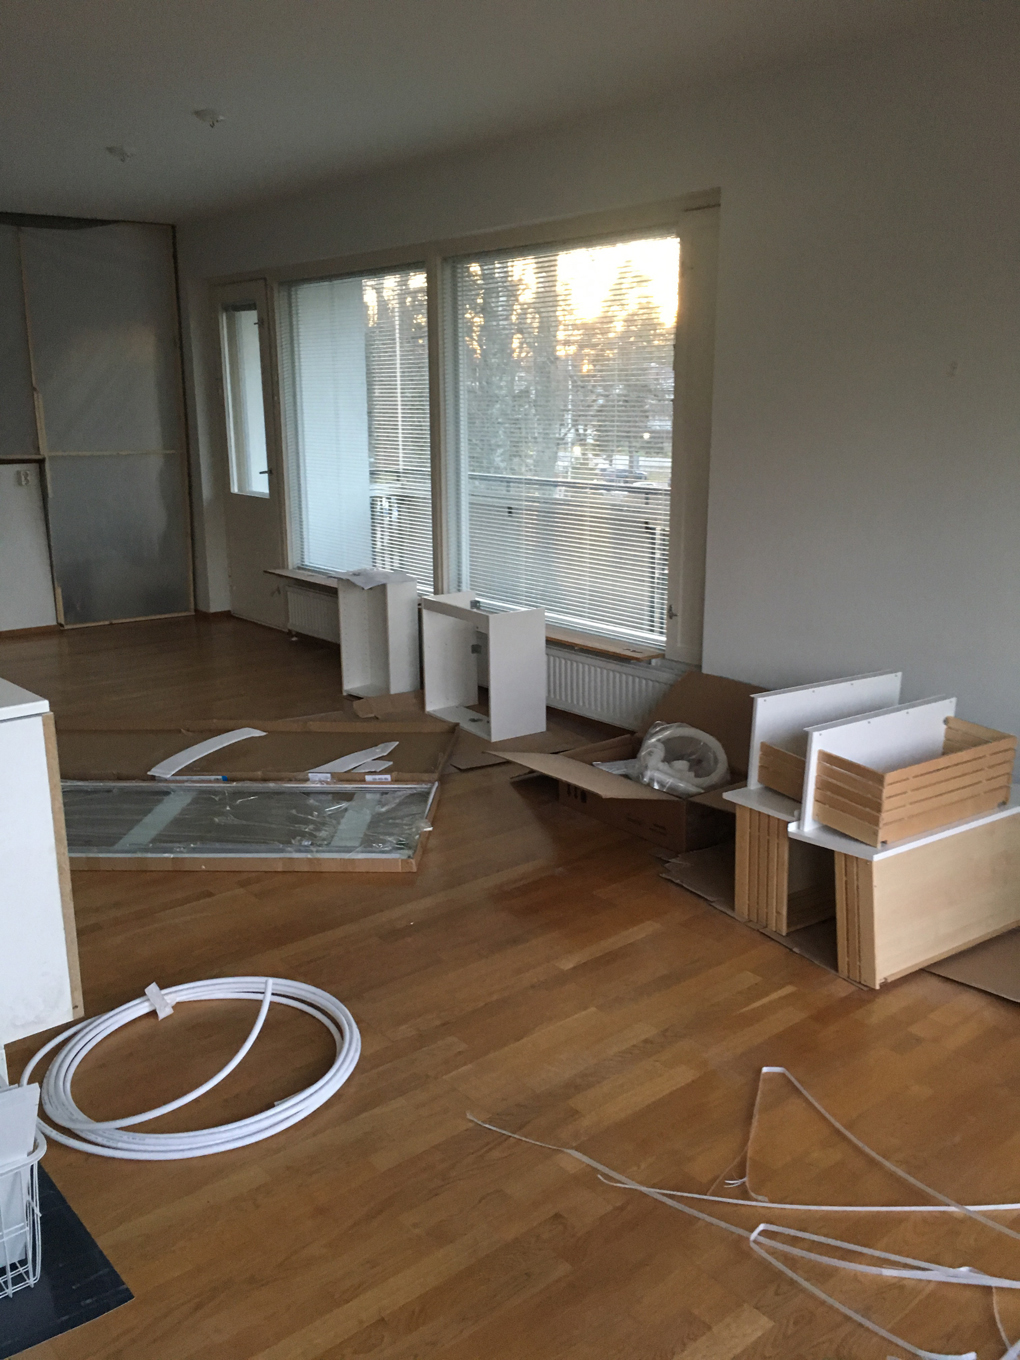 Empty room with half-assembled pieces of furniture.